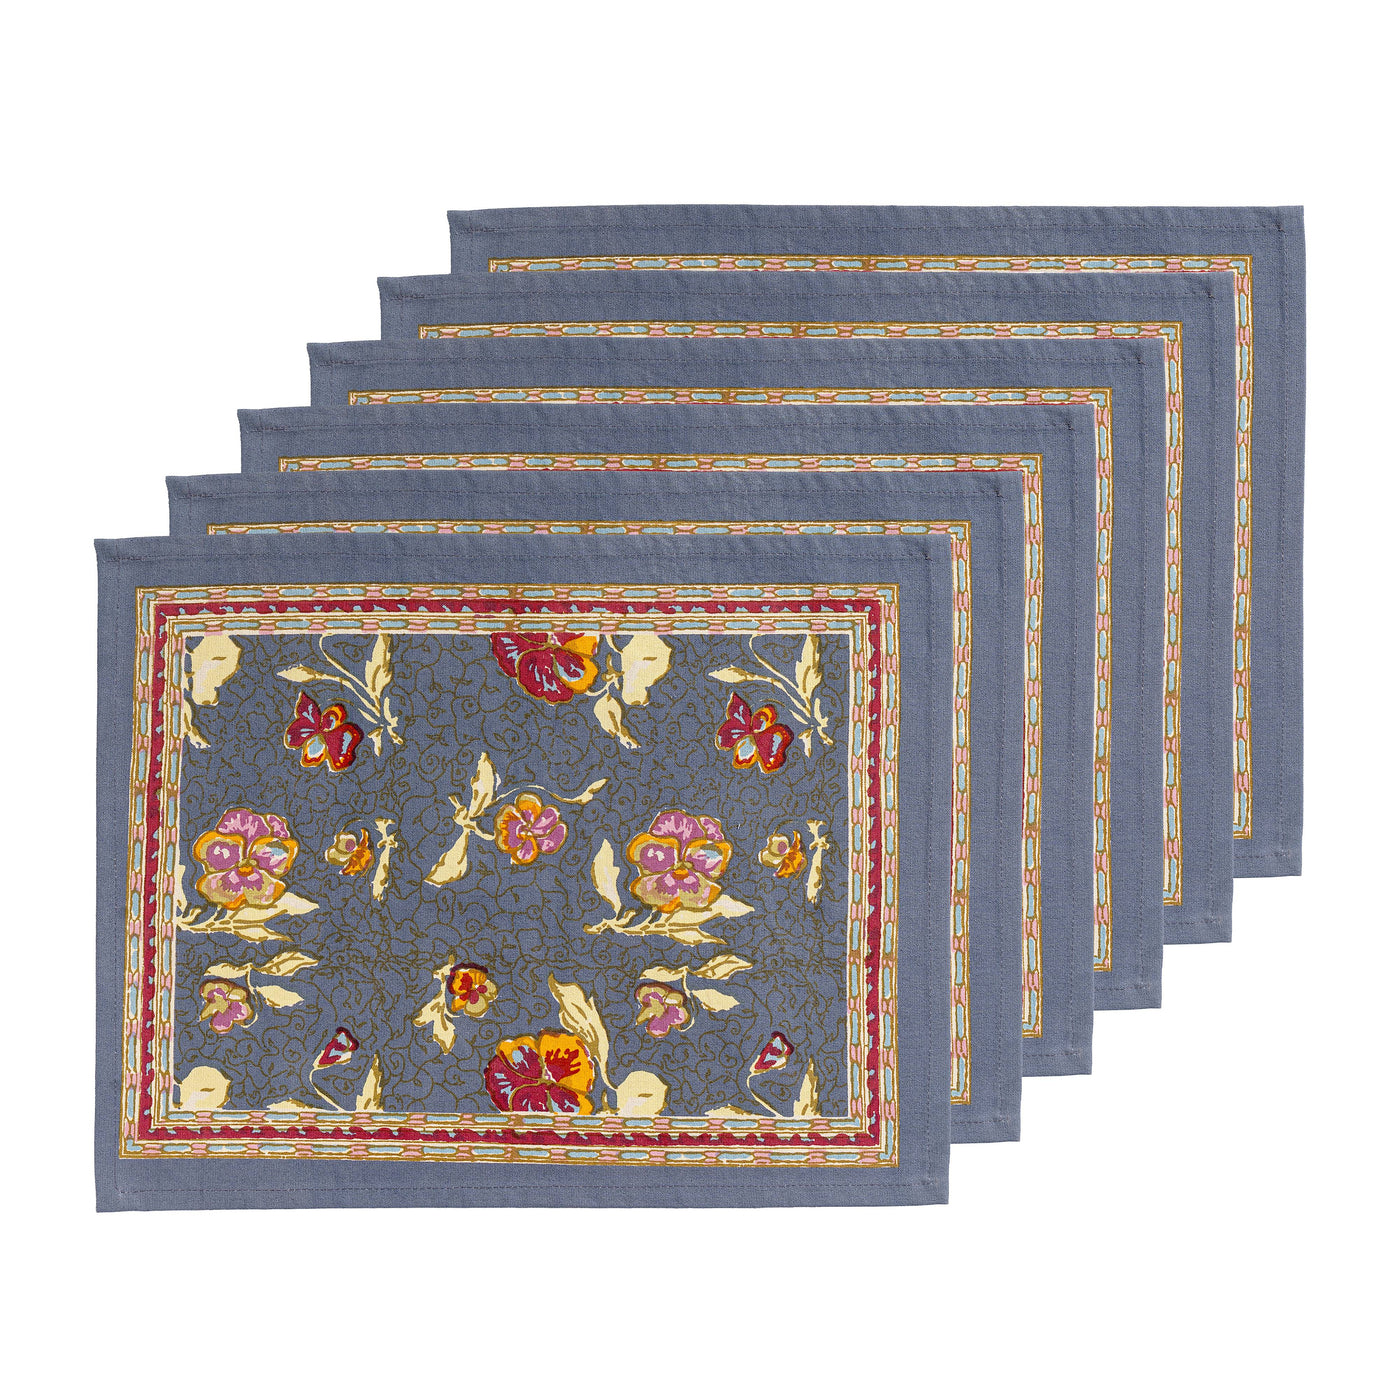 Pansy Placemats Red & Grey, Set of 6